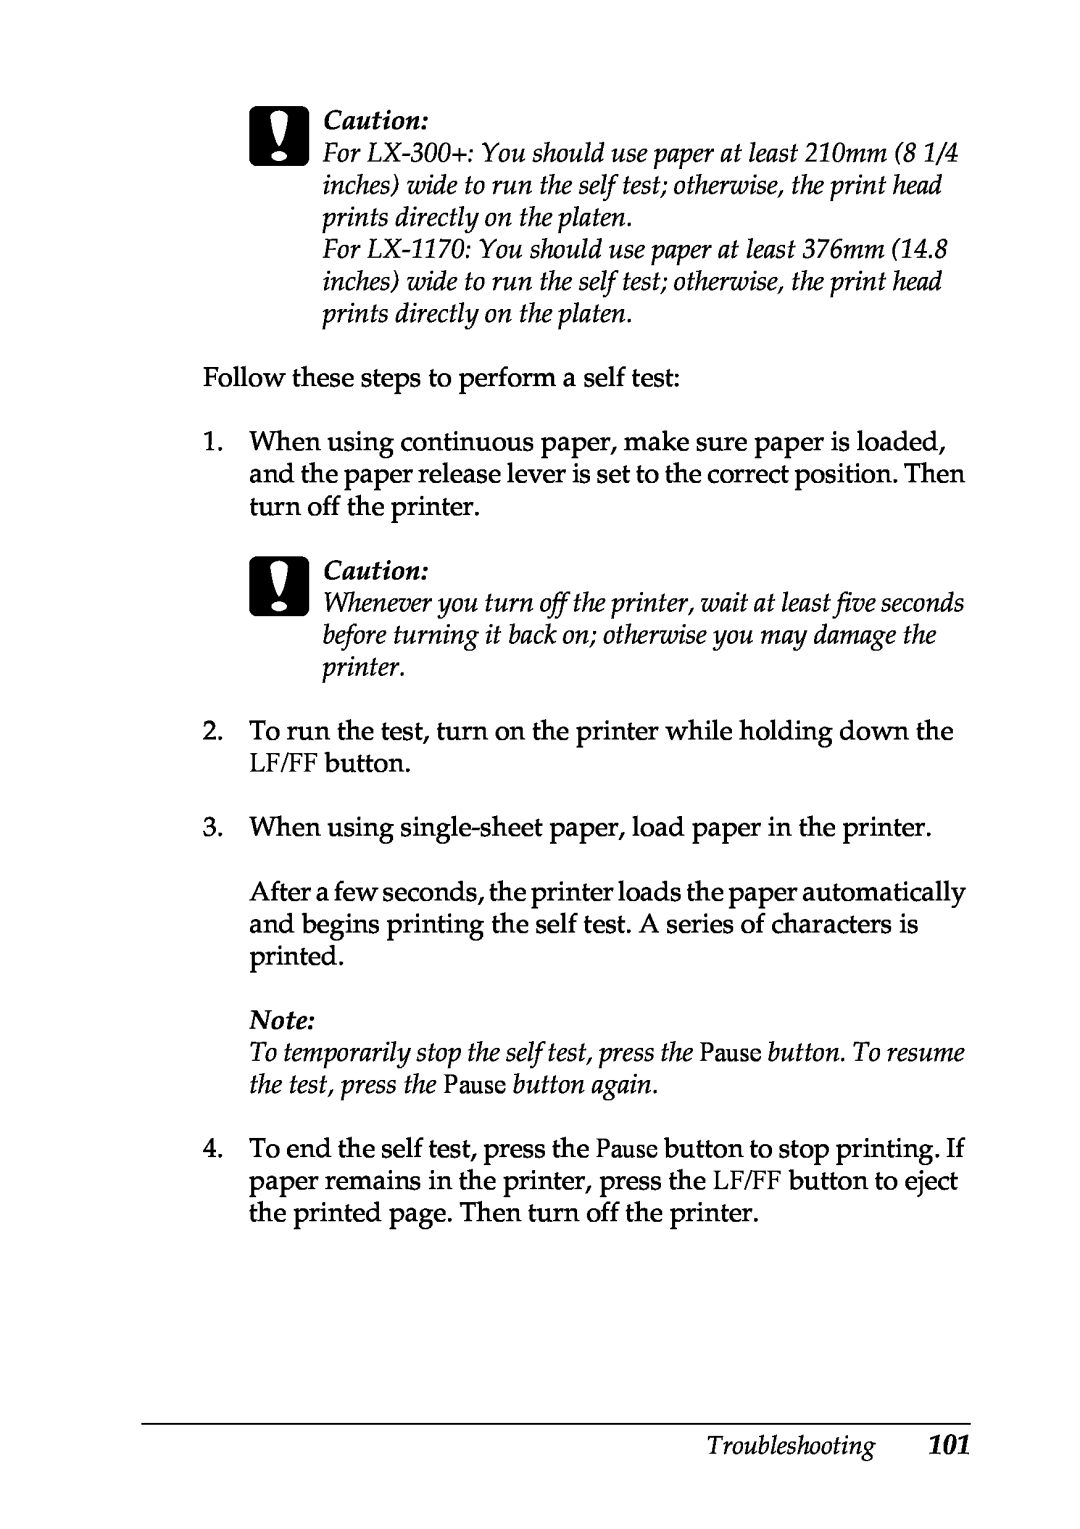 Epson LX-1170 manual c Caution, Follow these steps to perform a self test 